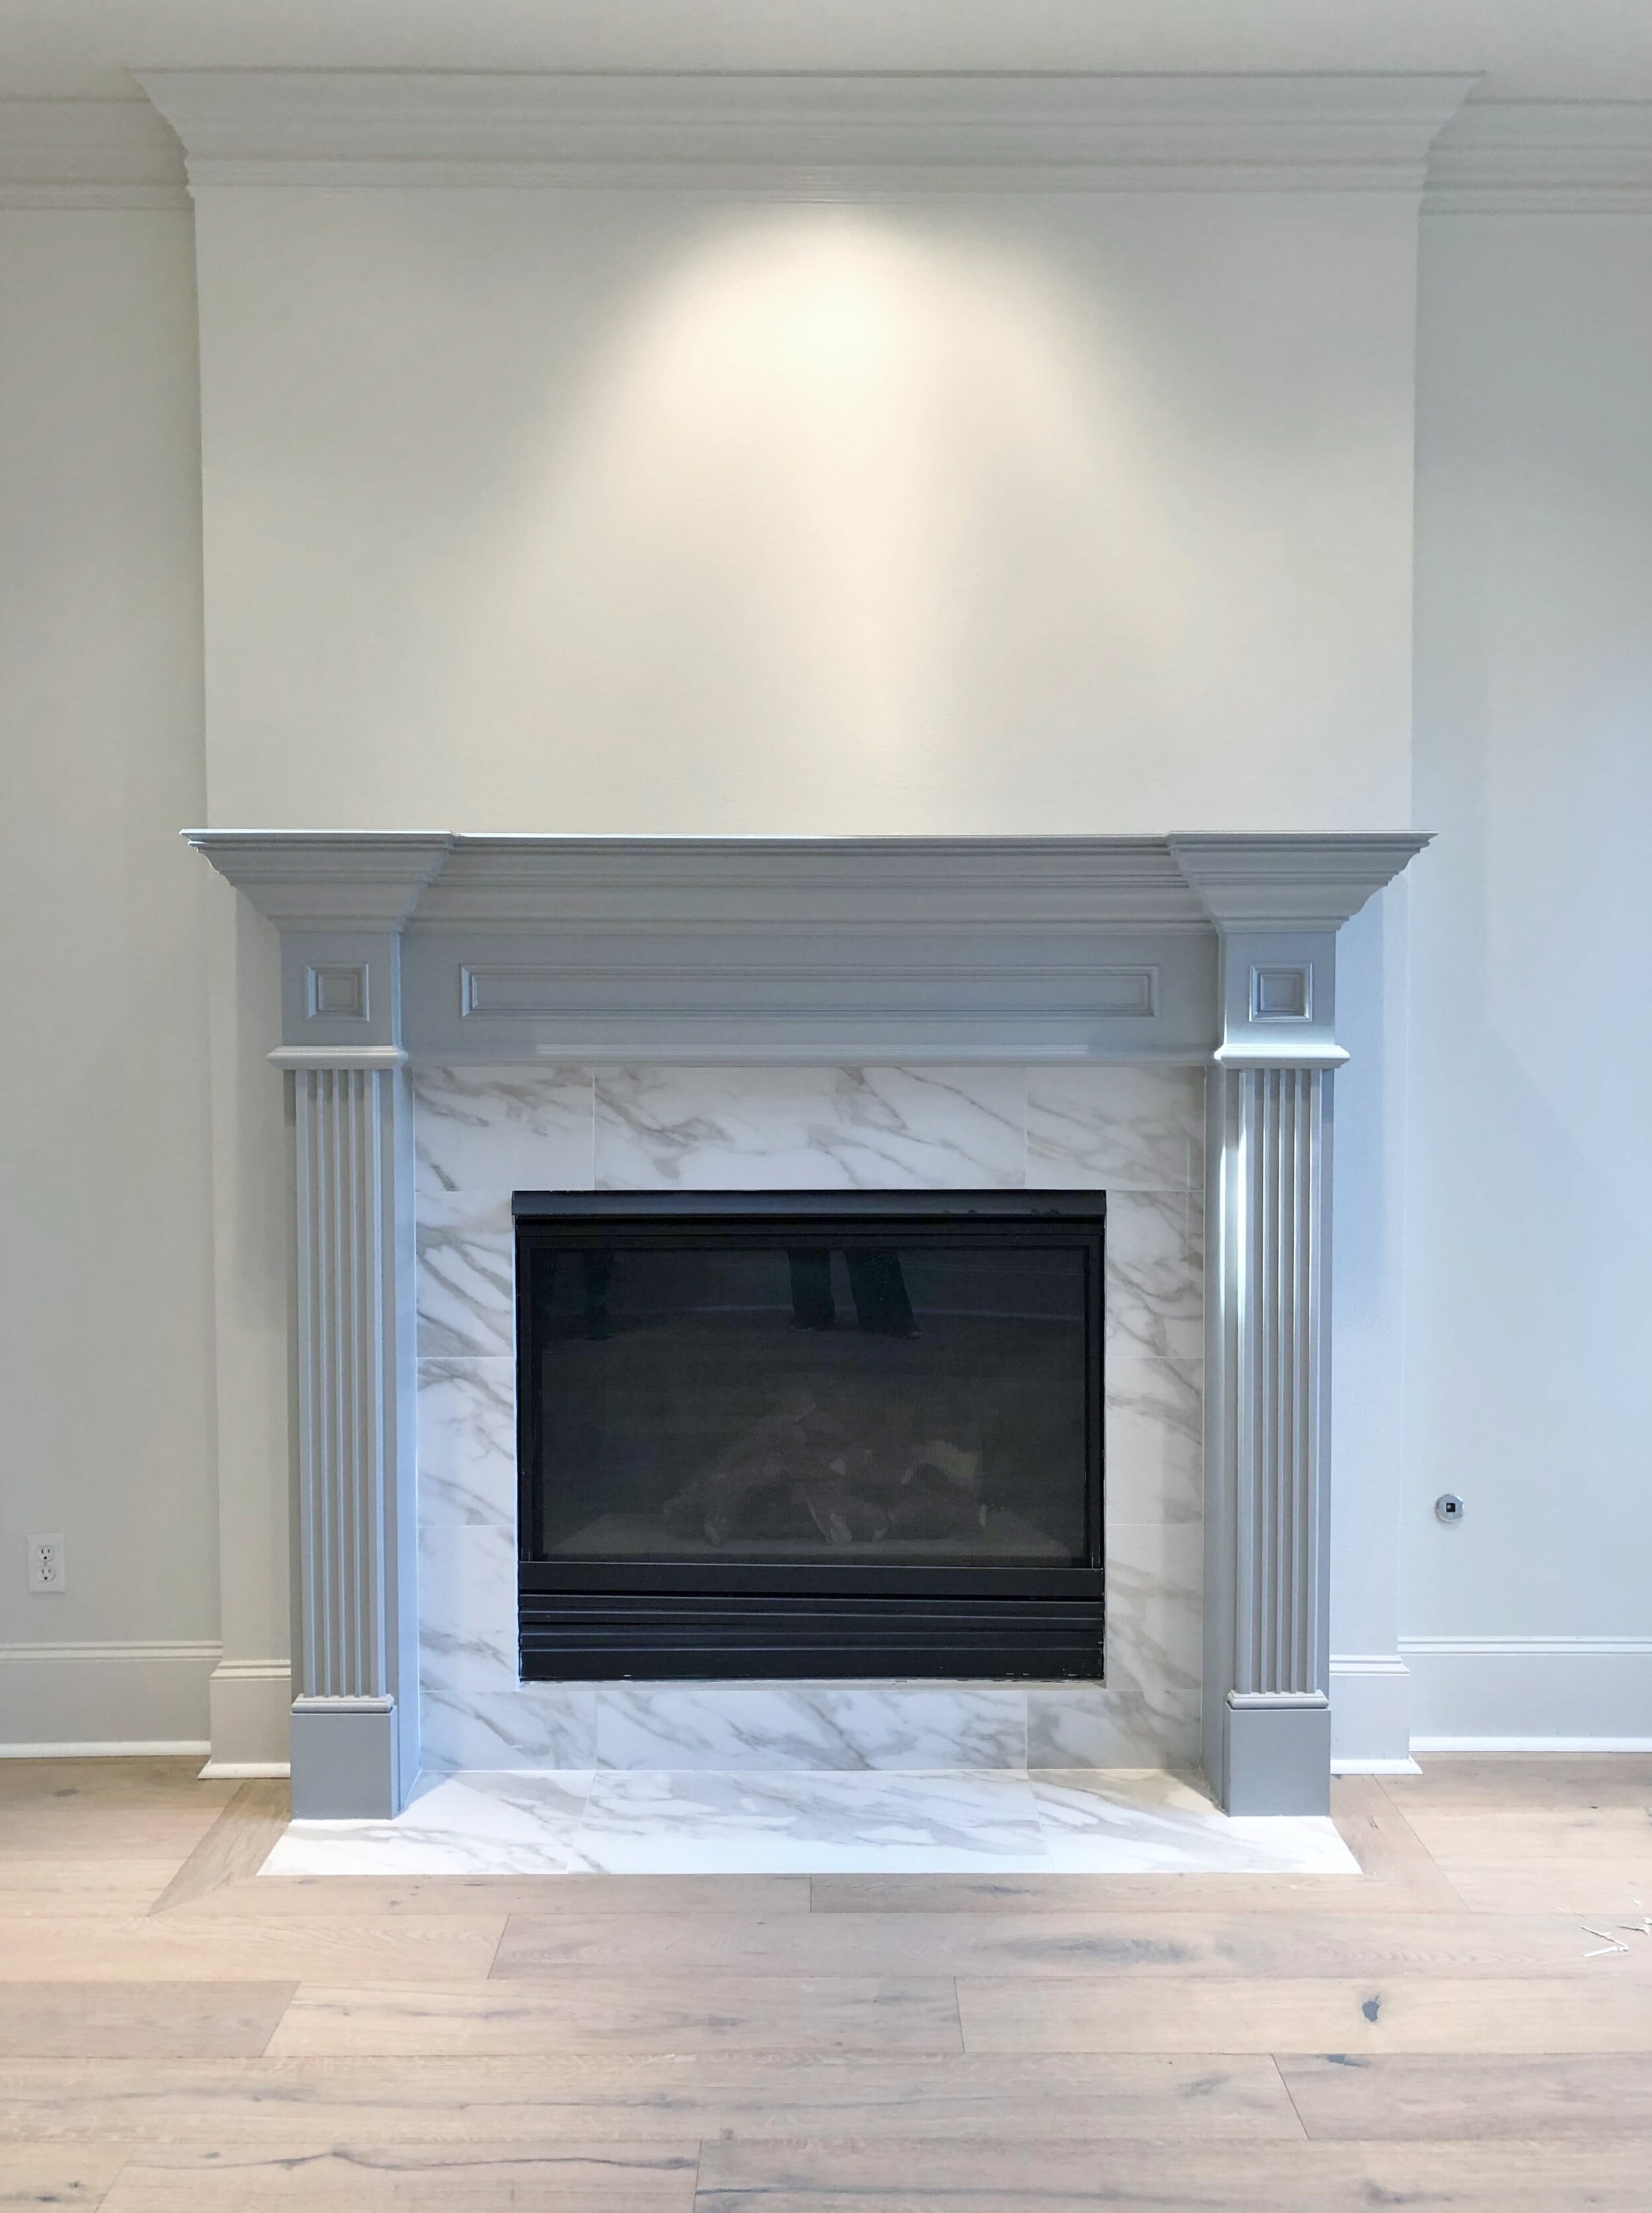 Fireplace Remodel, How To Redo Tile Around Fireplace